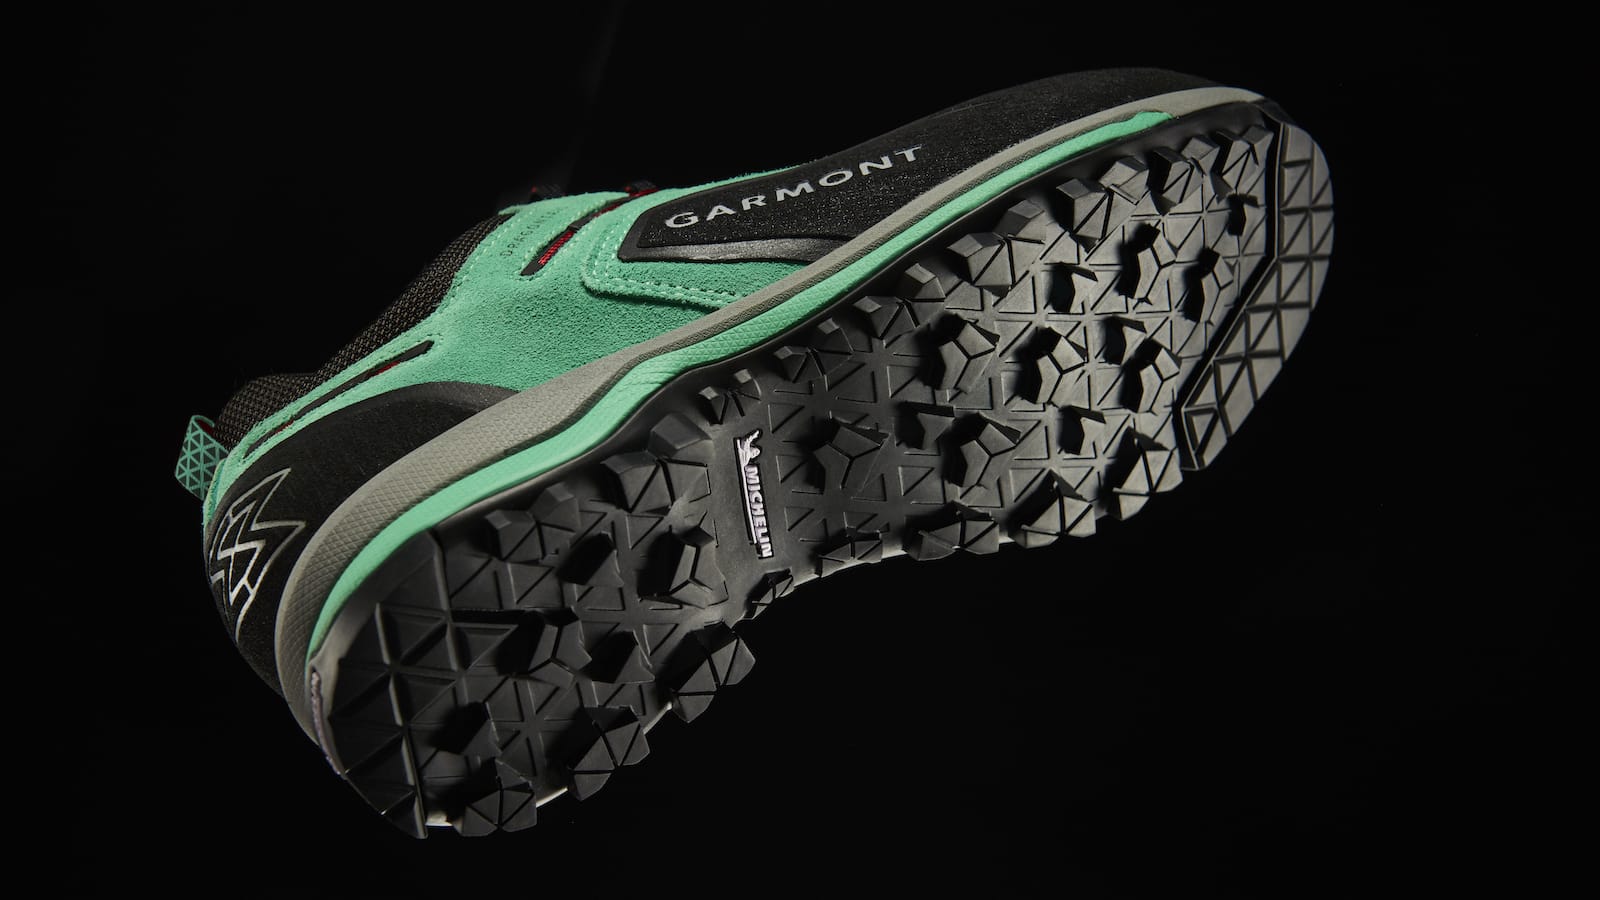 Peck Utallige Napier THE HOTTEST HIKING SHOE OF 2021: THE DRAGONTAIL TECH GTX - Soles by MICHELIN